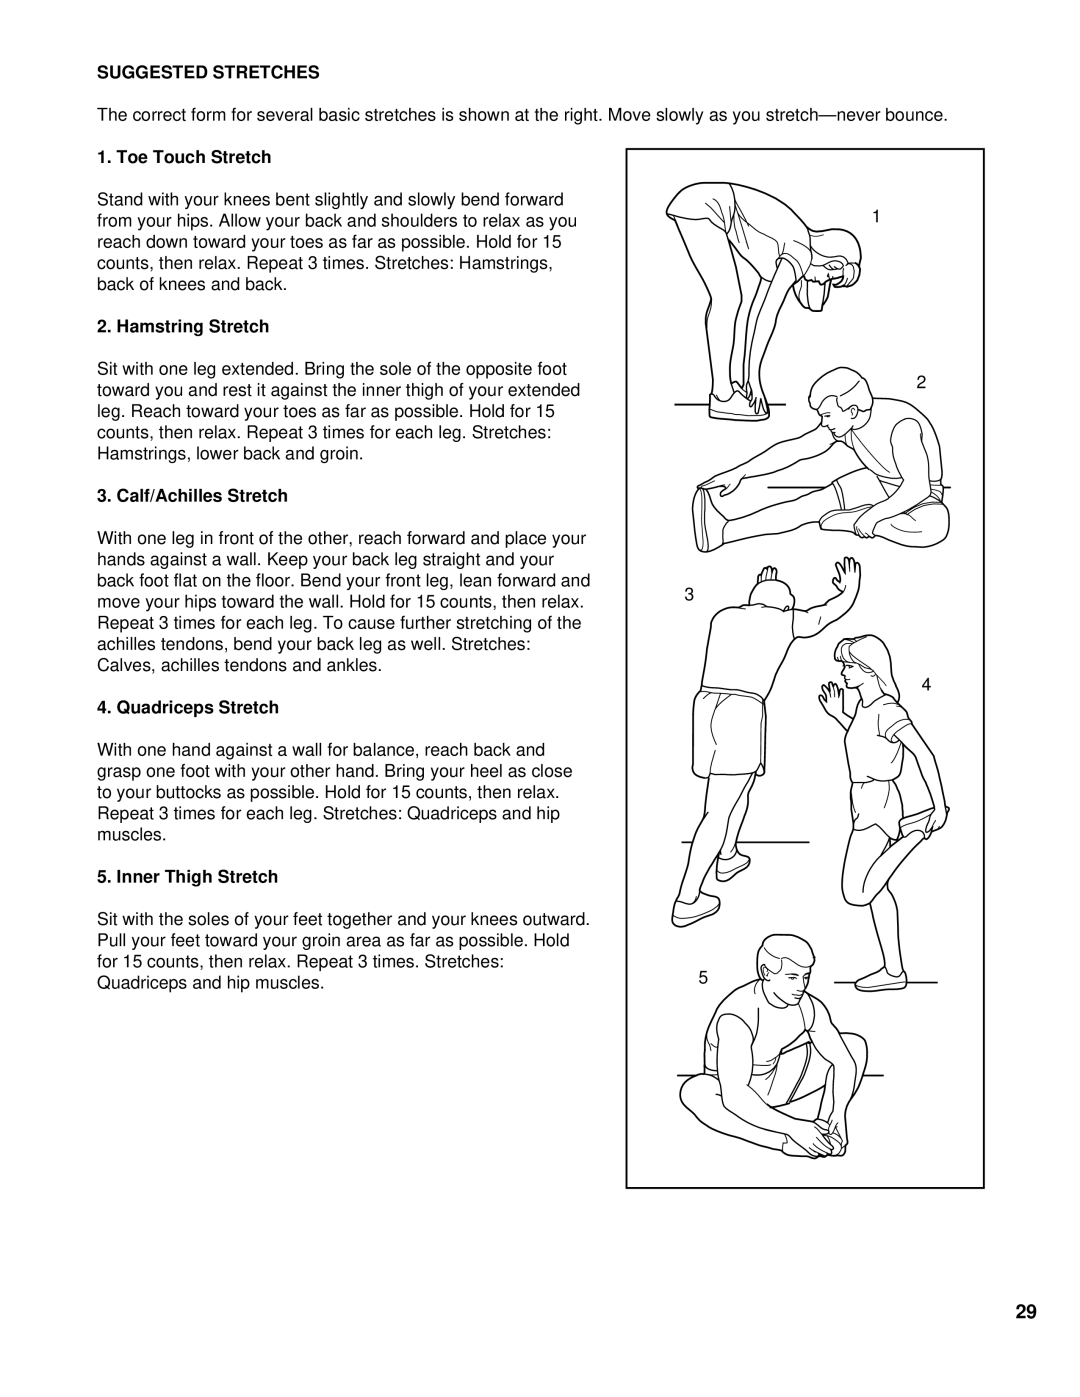 NordicTrack NTTL11994 user manual Suggested Stretches 